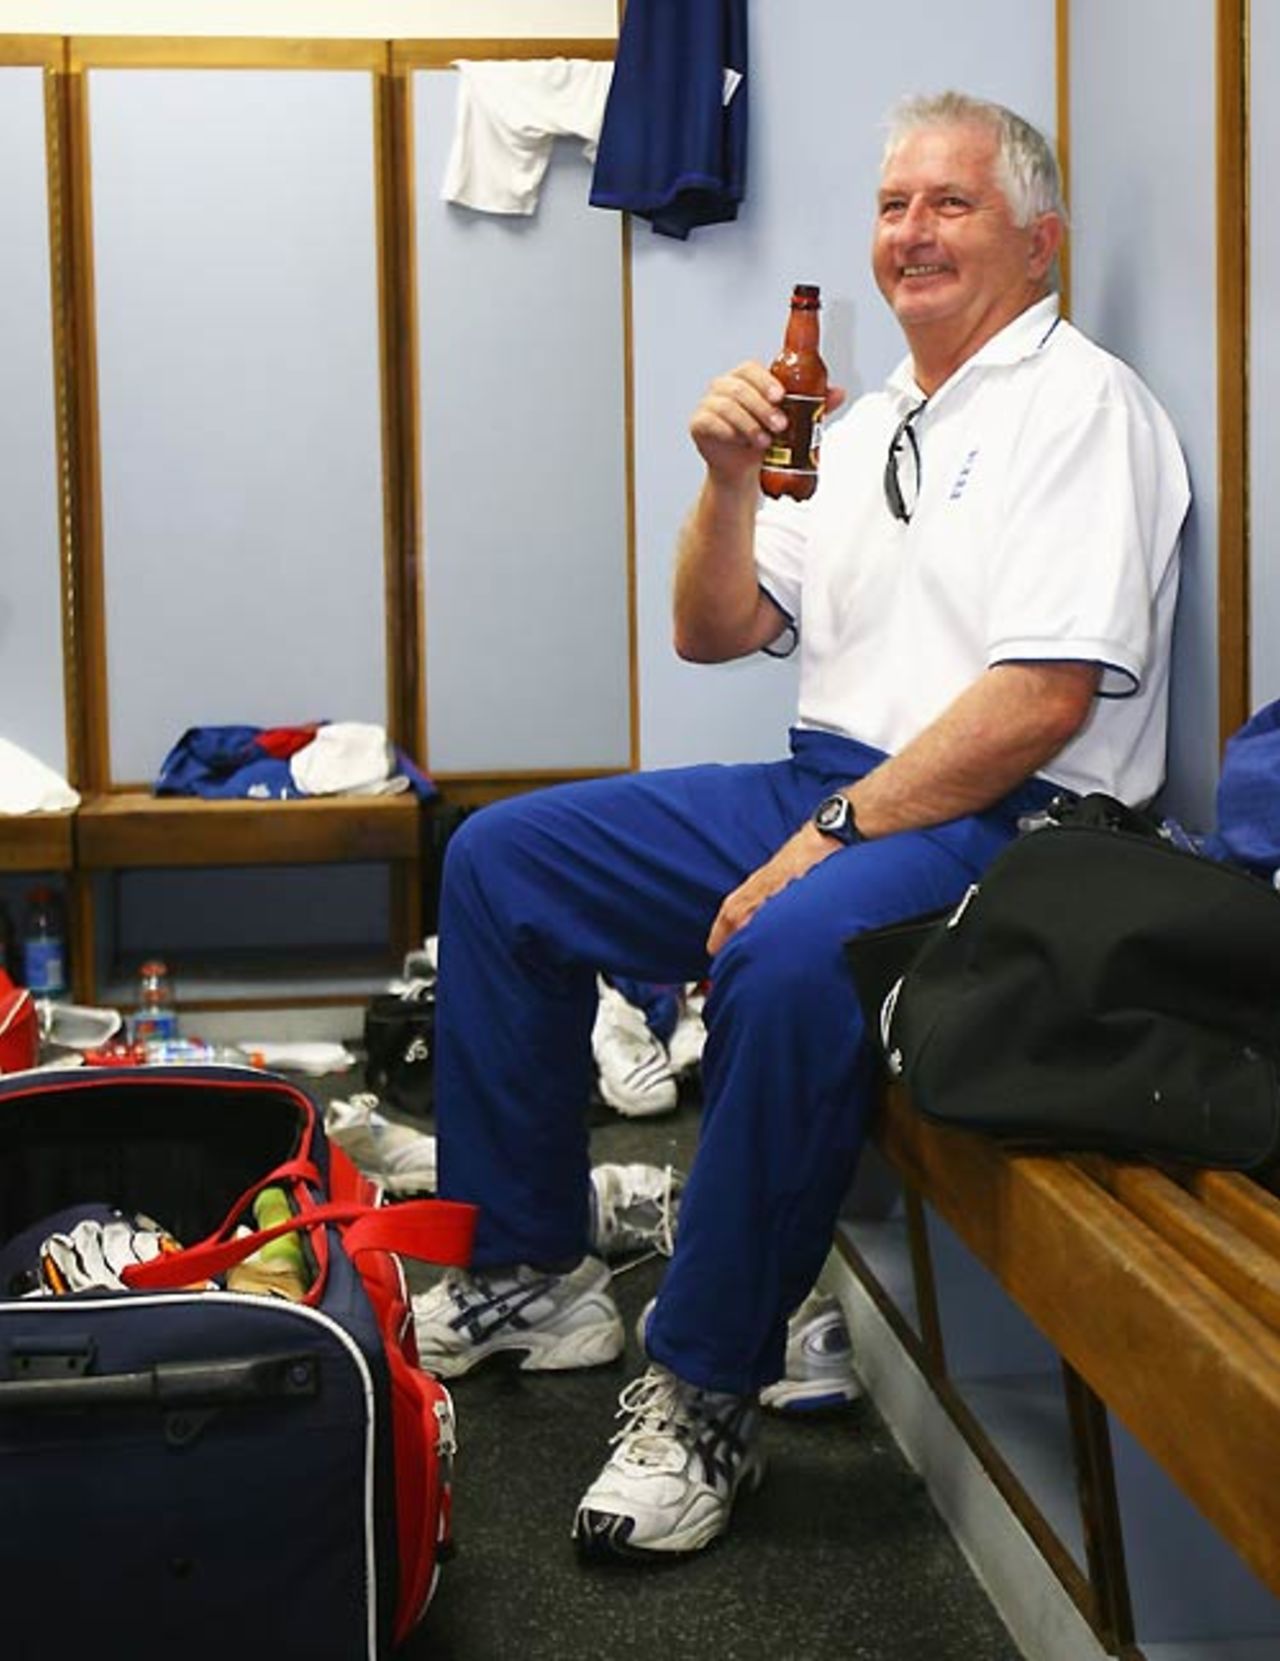 'Cheers to you all' - Duncan Fletcher signs off with a beer and a broad smile, England v West Indies, Super Eights, Barbados, April 21, 2007